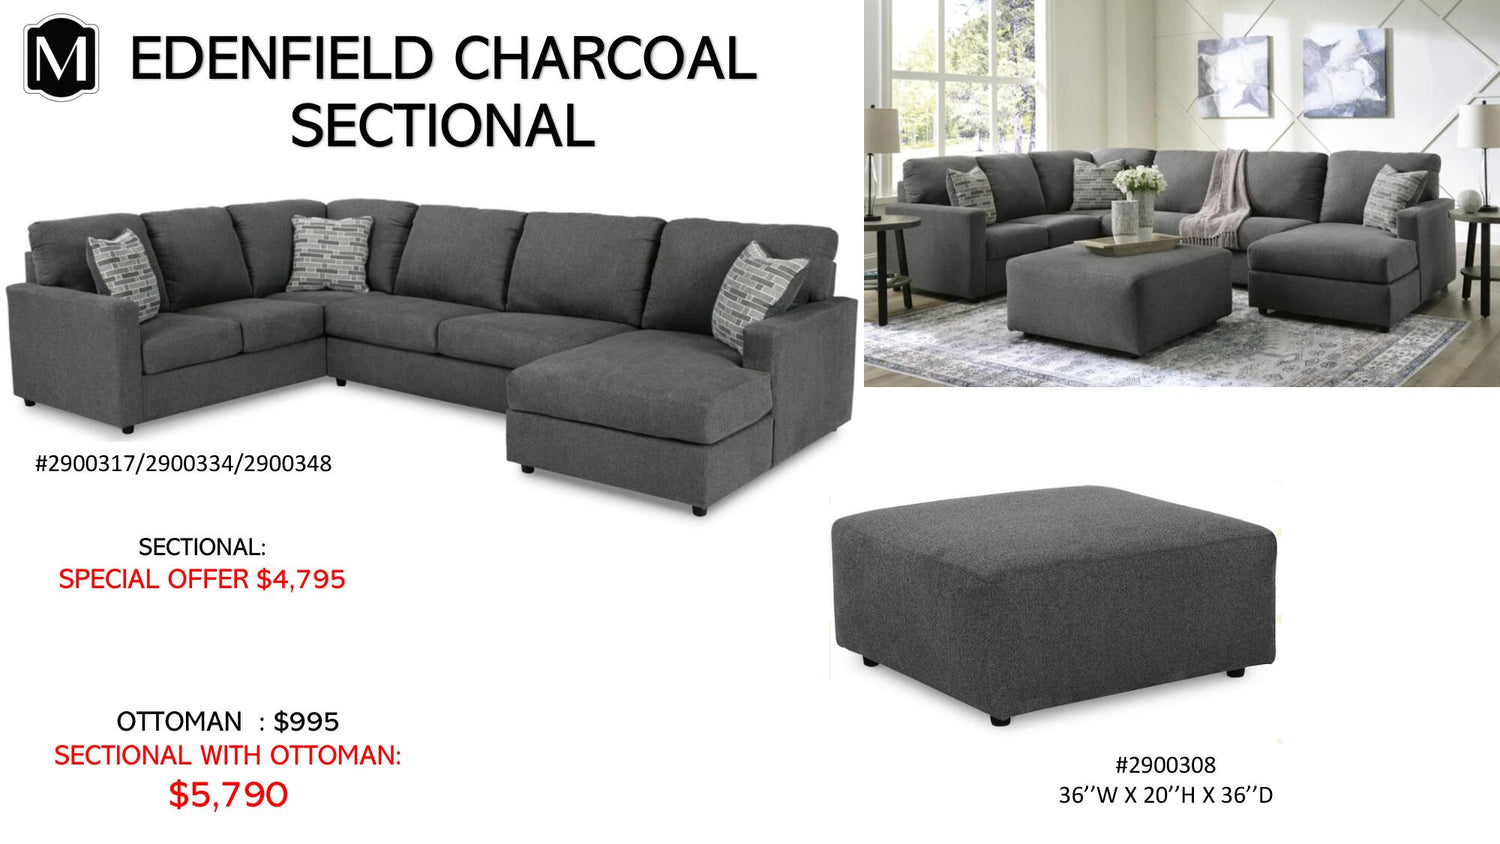 Edenfield Charcoal Sectional + Ottoman